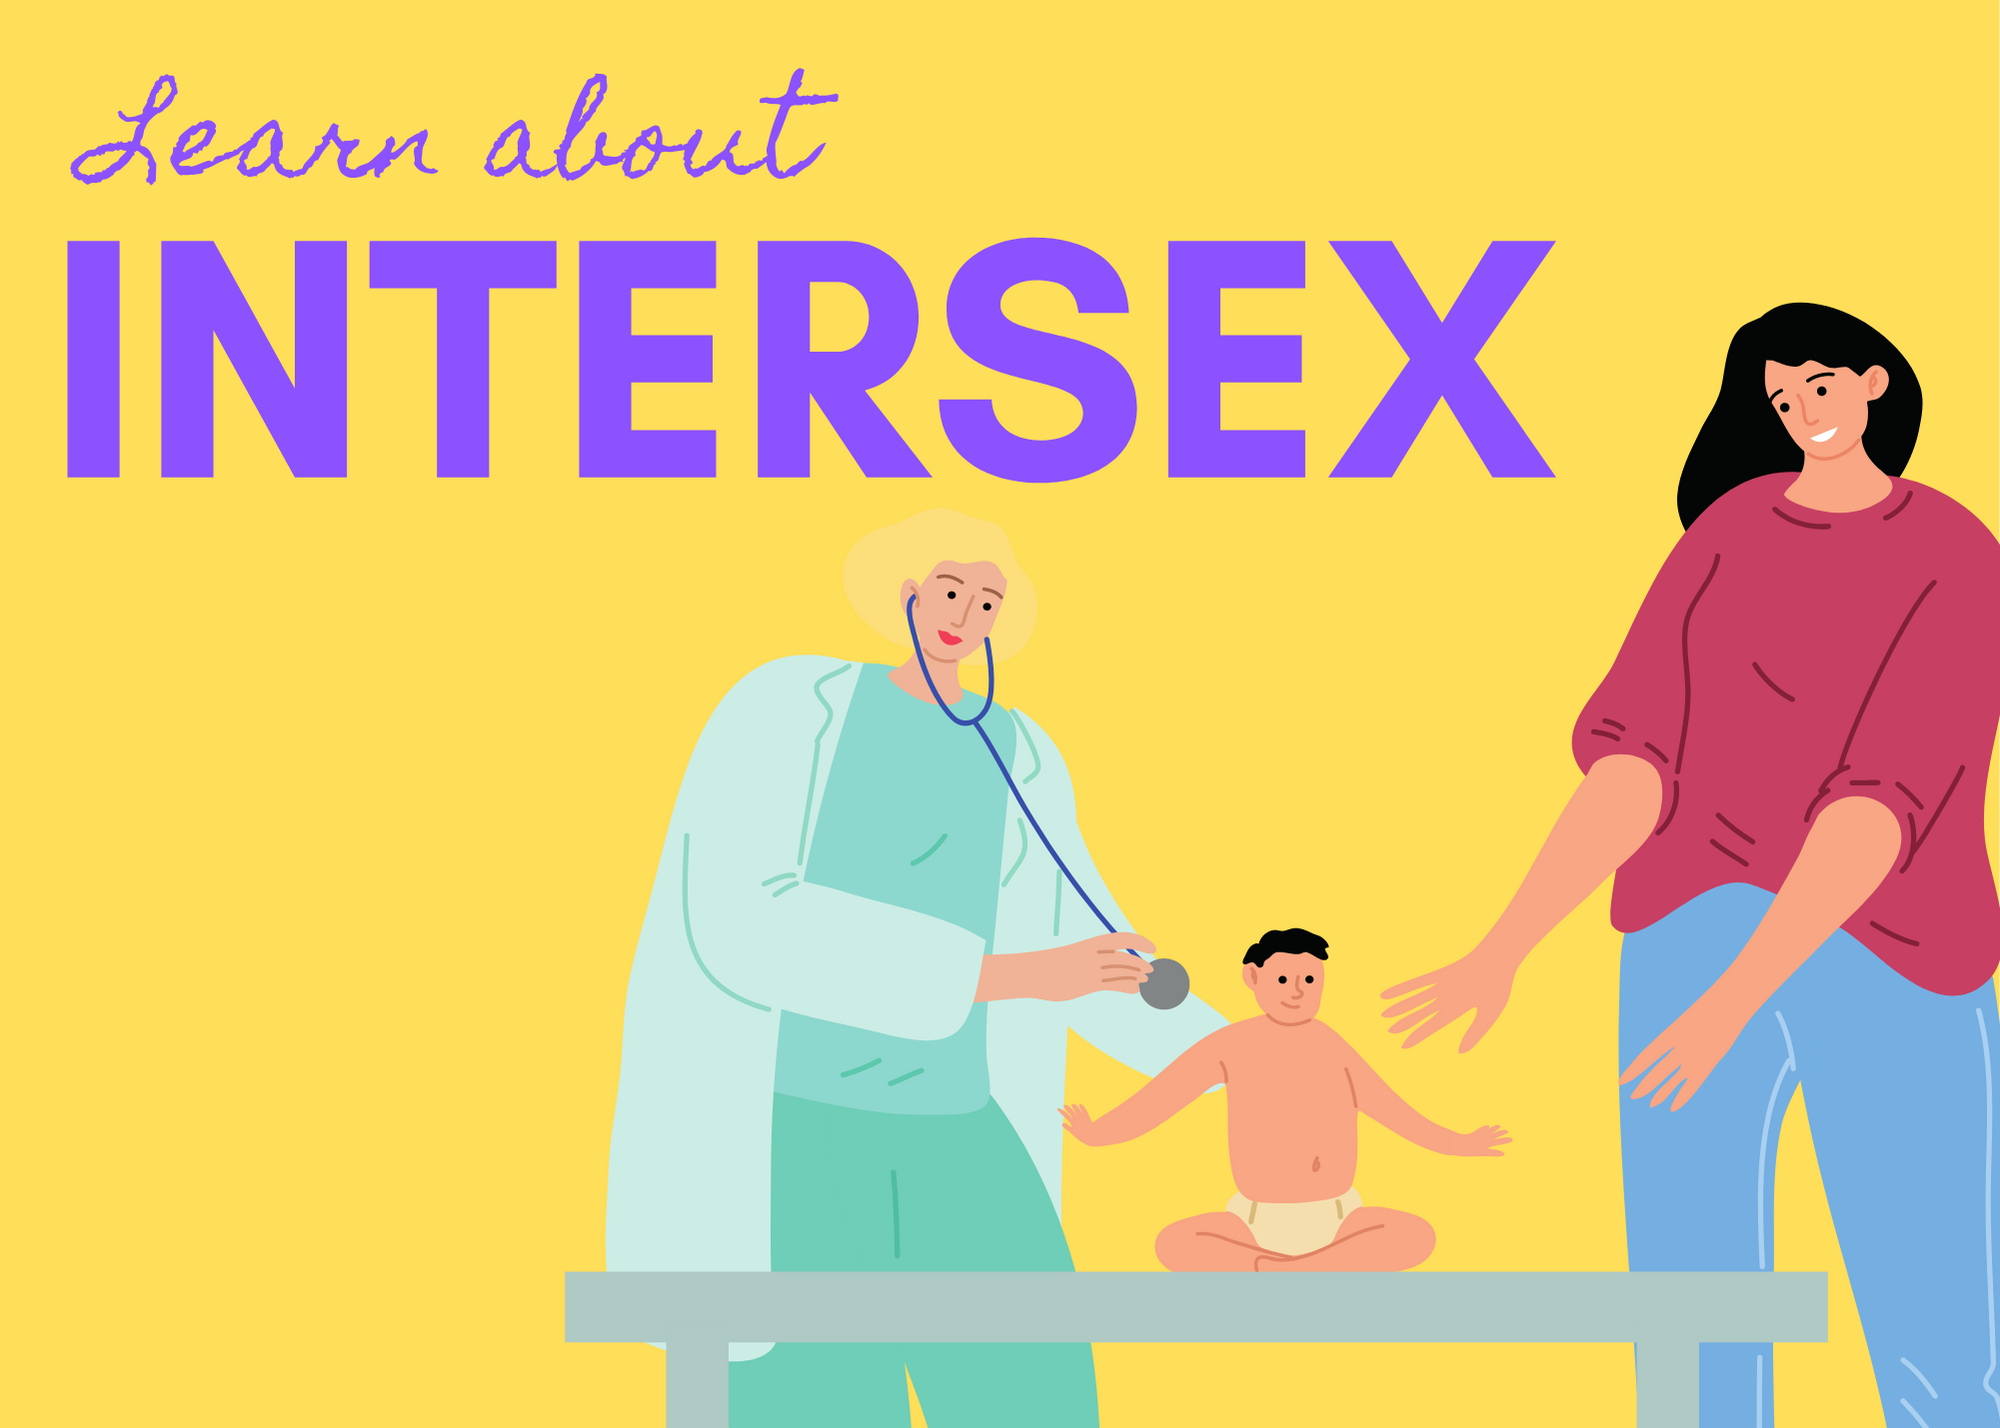 Learn about intersex